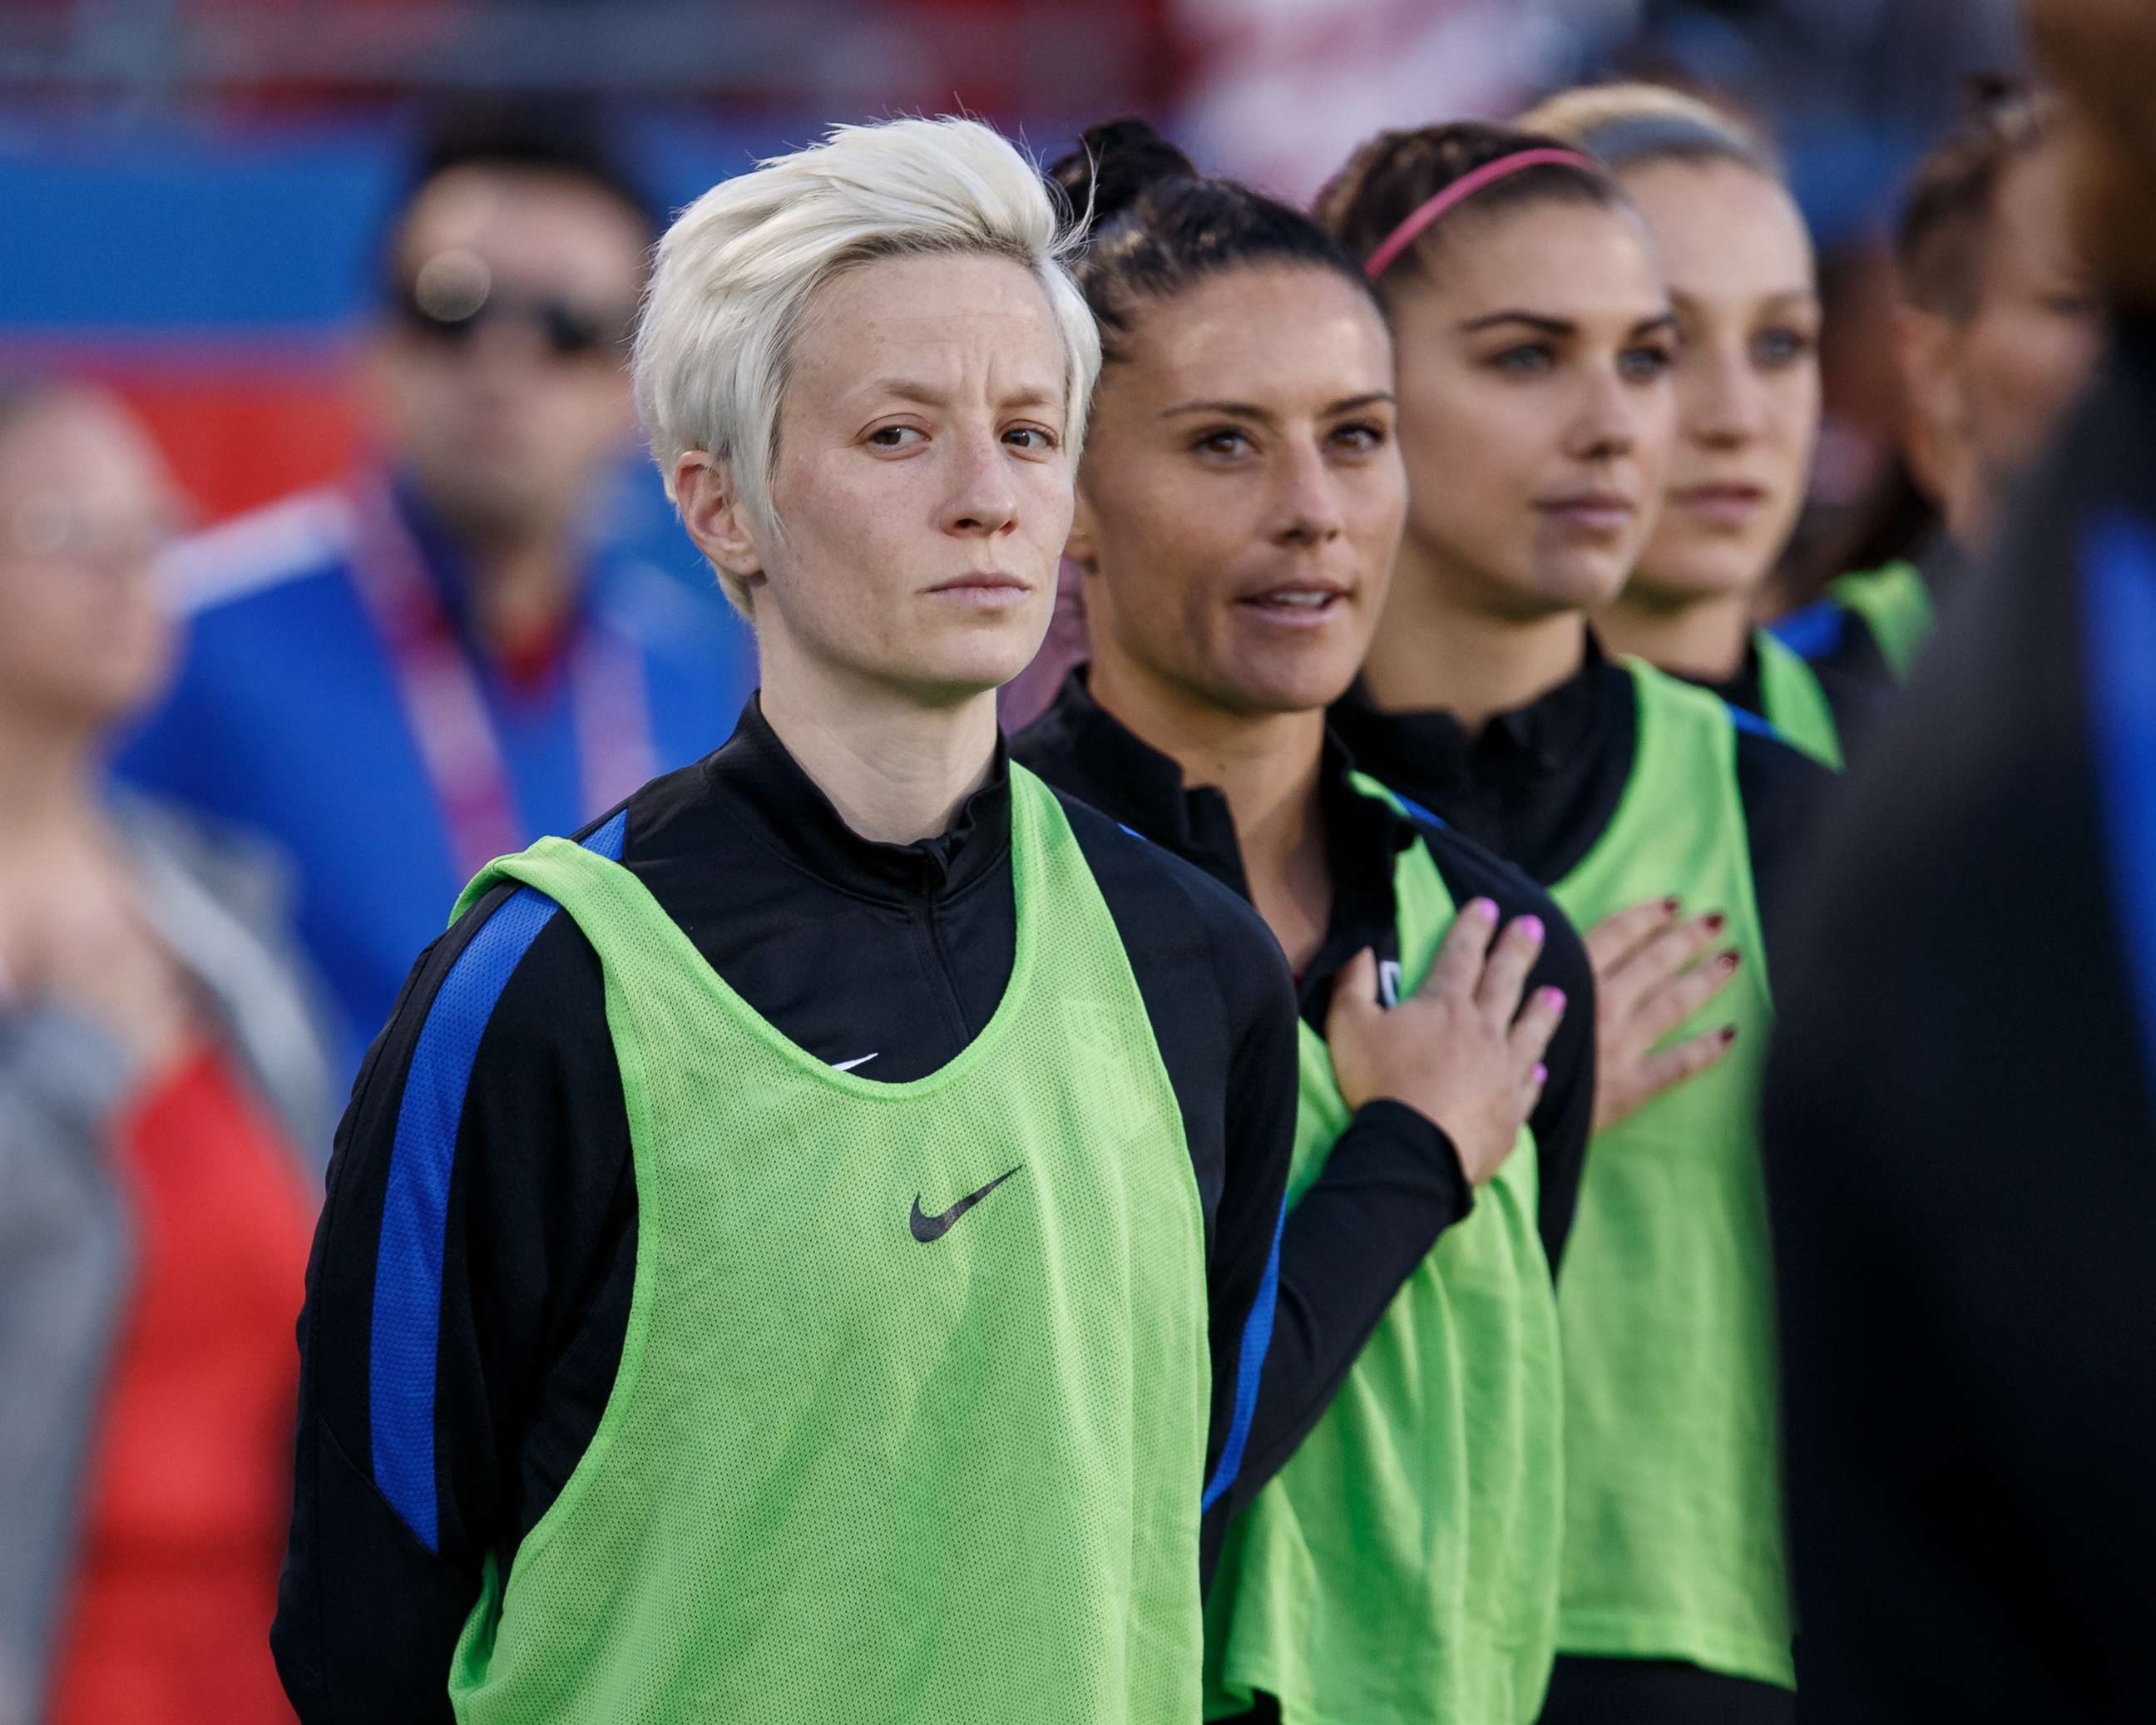 PHOTO:Megan Rapinoe and teammates stand during the national anthem during the International Friendly match between the USA and Russia on April 6, 2017, at Toyota Stadium in Frisco, Texas.